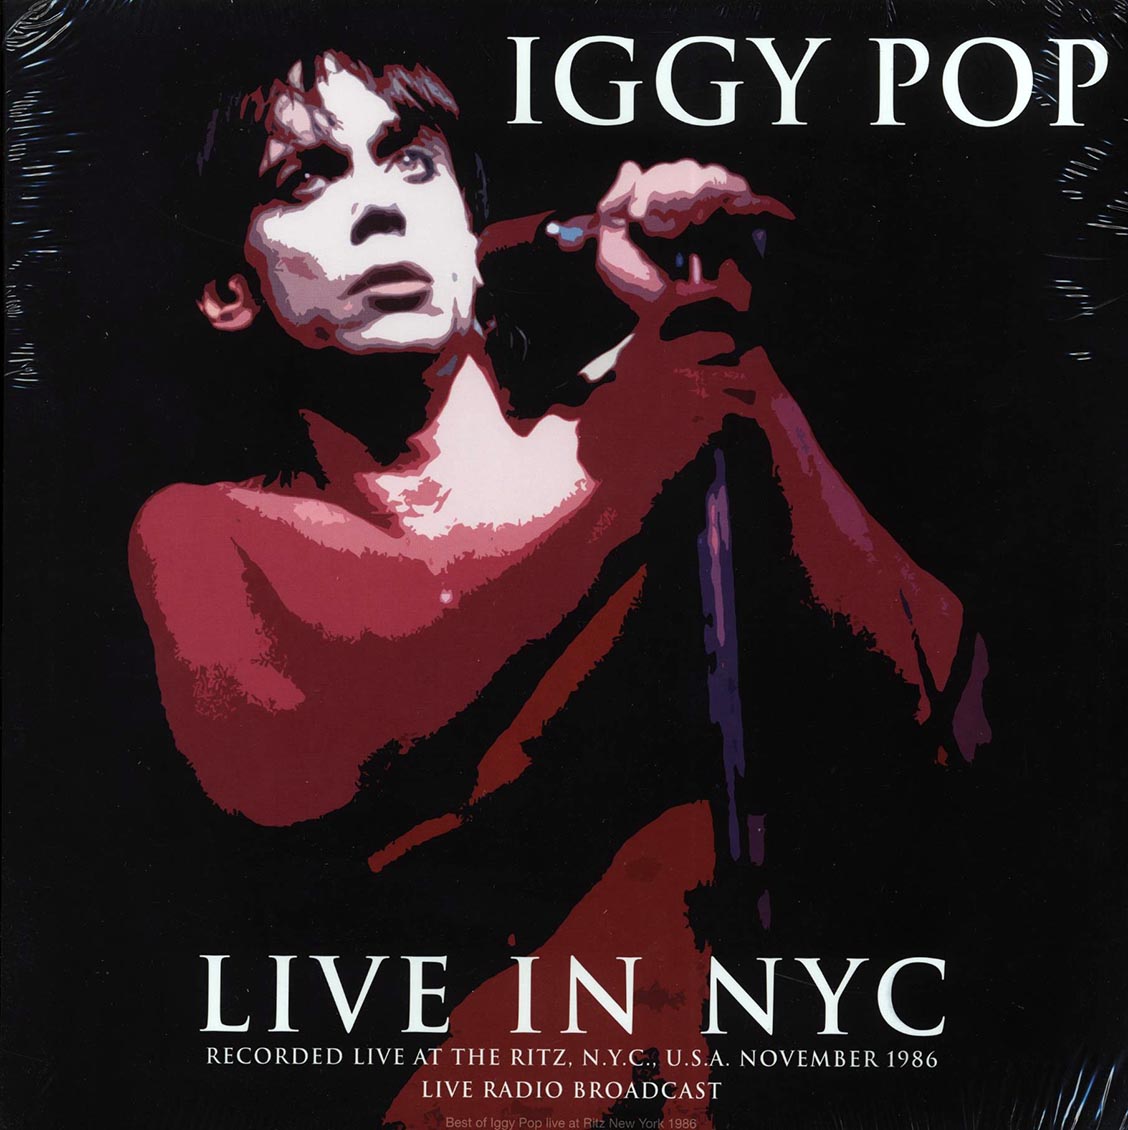 Iggy Pop - Live In NYC: Recorded Live At The Ritz, NYC, USA November 1986 Live Radio Broadcast - Vinyl LP